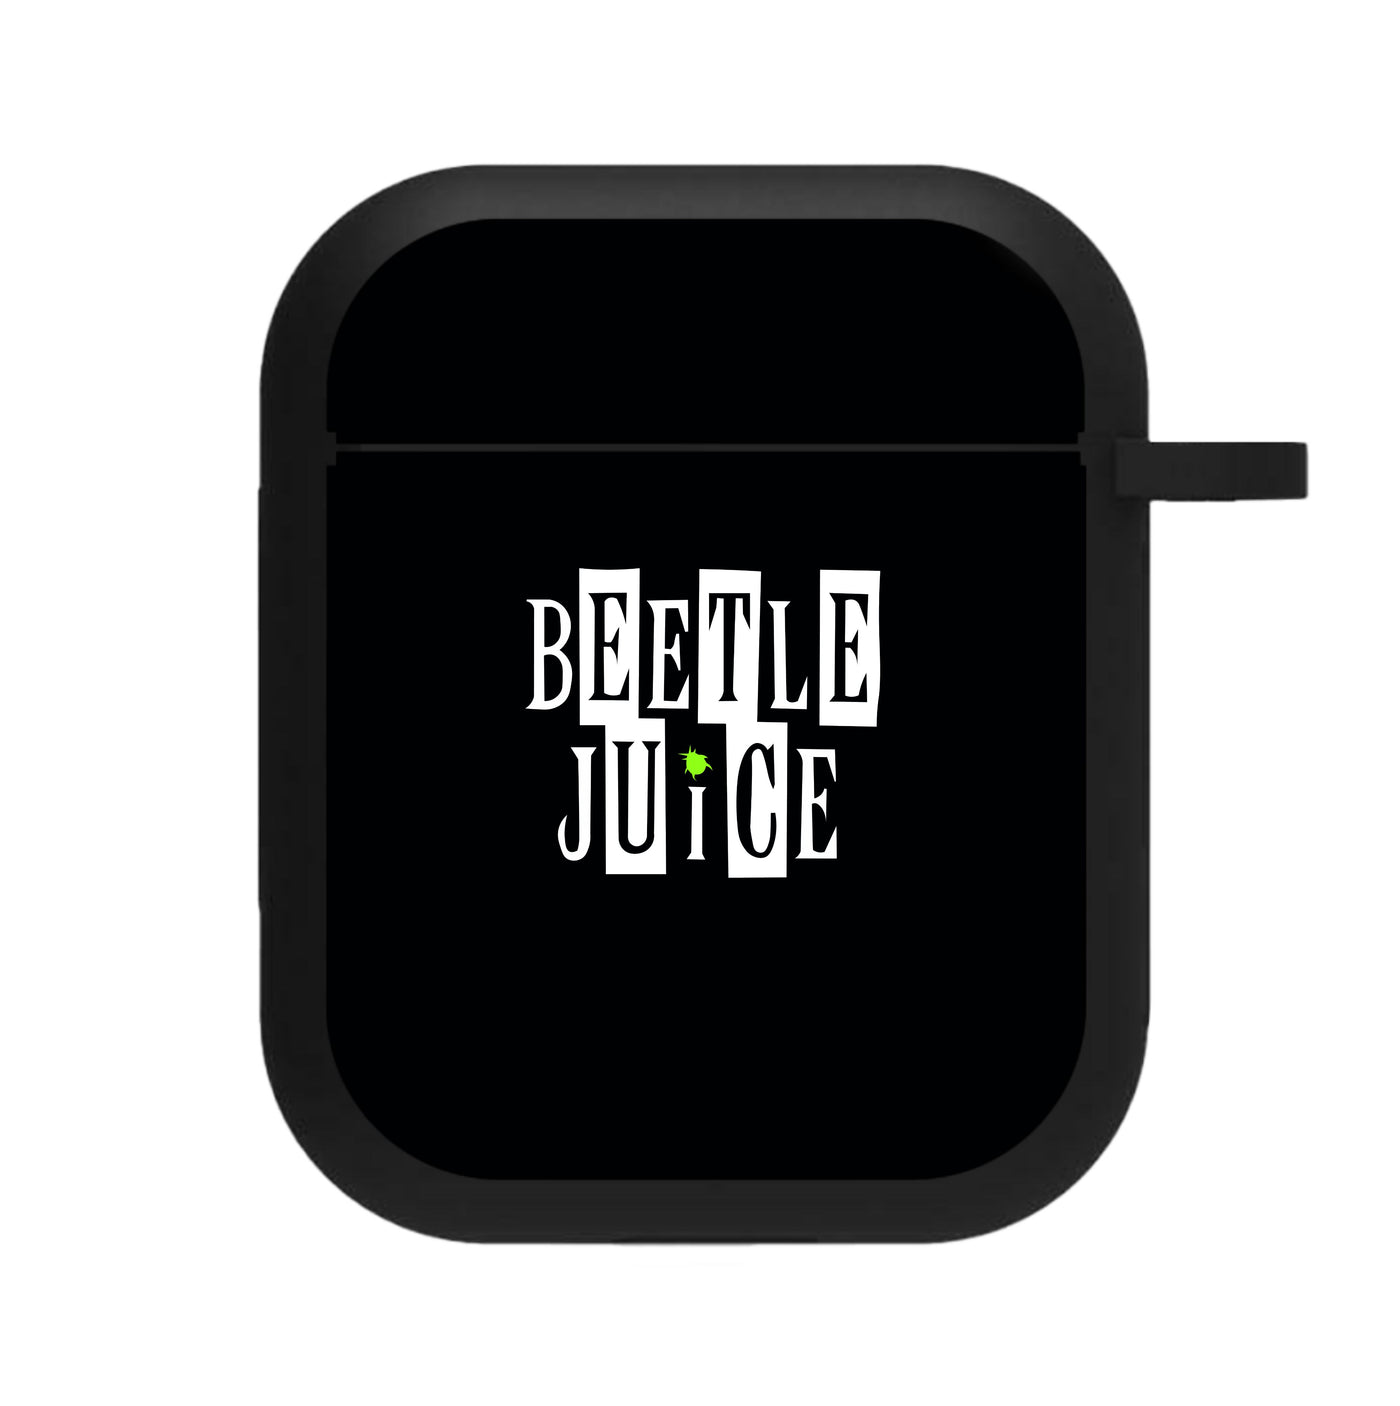 Text - Beetlejuice AirPods Case